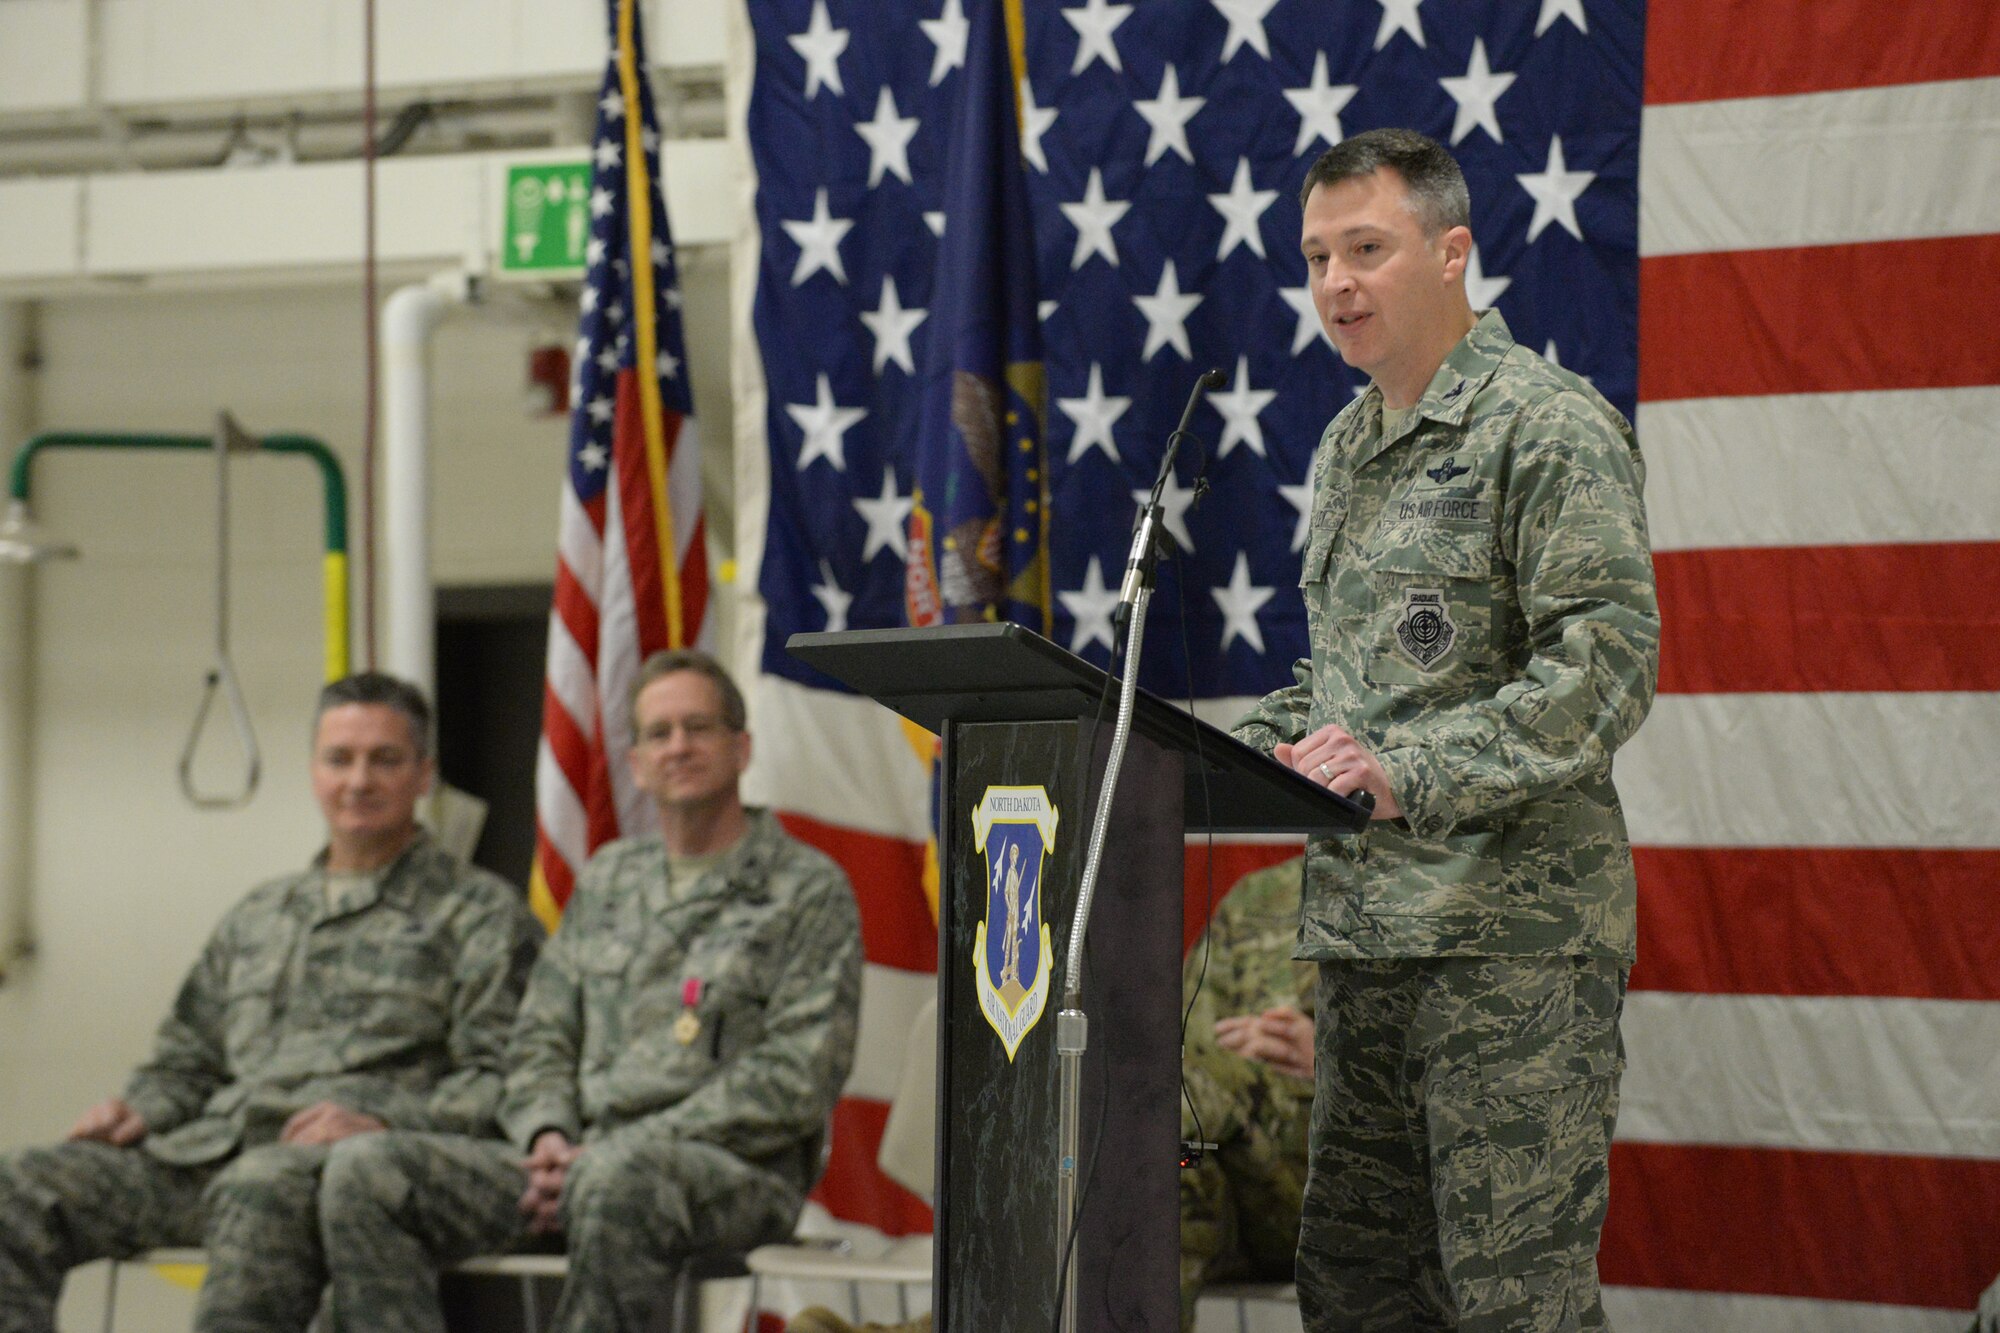 Col. Thomas “Britt” Hatley addresses the 119th Wing unit members standing in formation for the first time as their commander during a change of command ceremony at the North Dakota Air National Guard Base, Fargo, N.D., Feb. 4, 2017. Hatley is replacing out-going 119th Wing commander Col. Kent Olson, seated second from left, who has been the 119th Wing commander since March 14, 2013. (U.S. Air National Guard photo by Senior Master Sgt. David H. Lipp/Released)